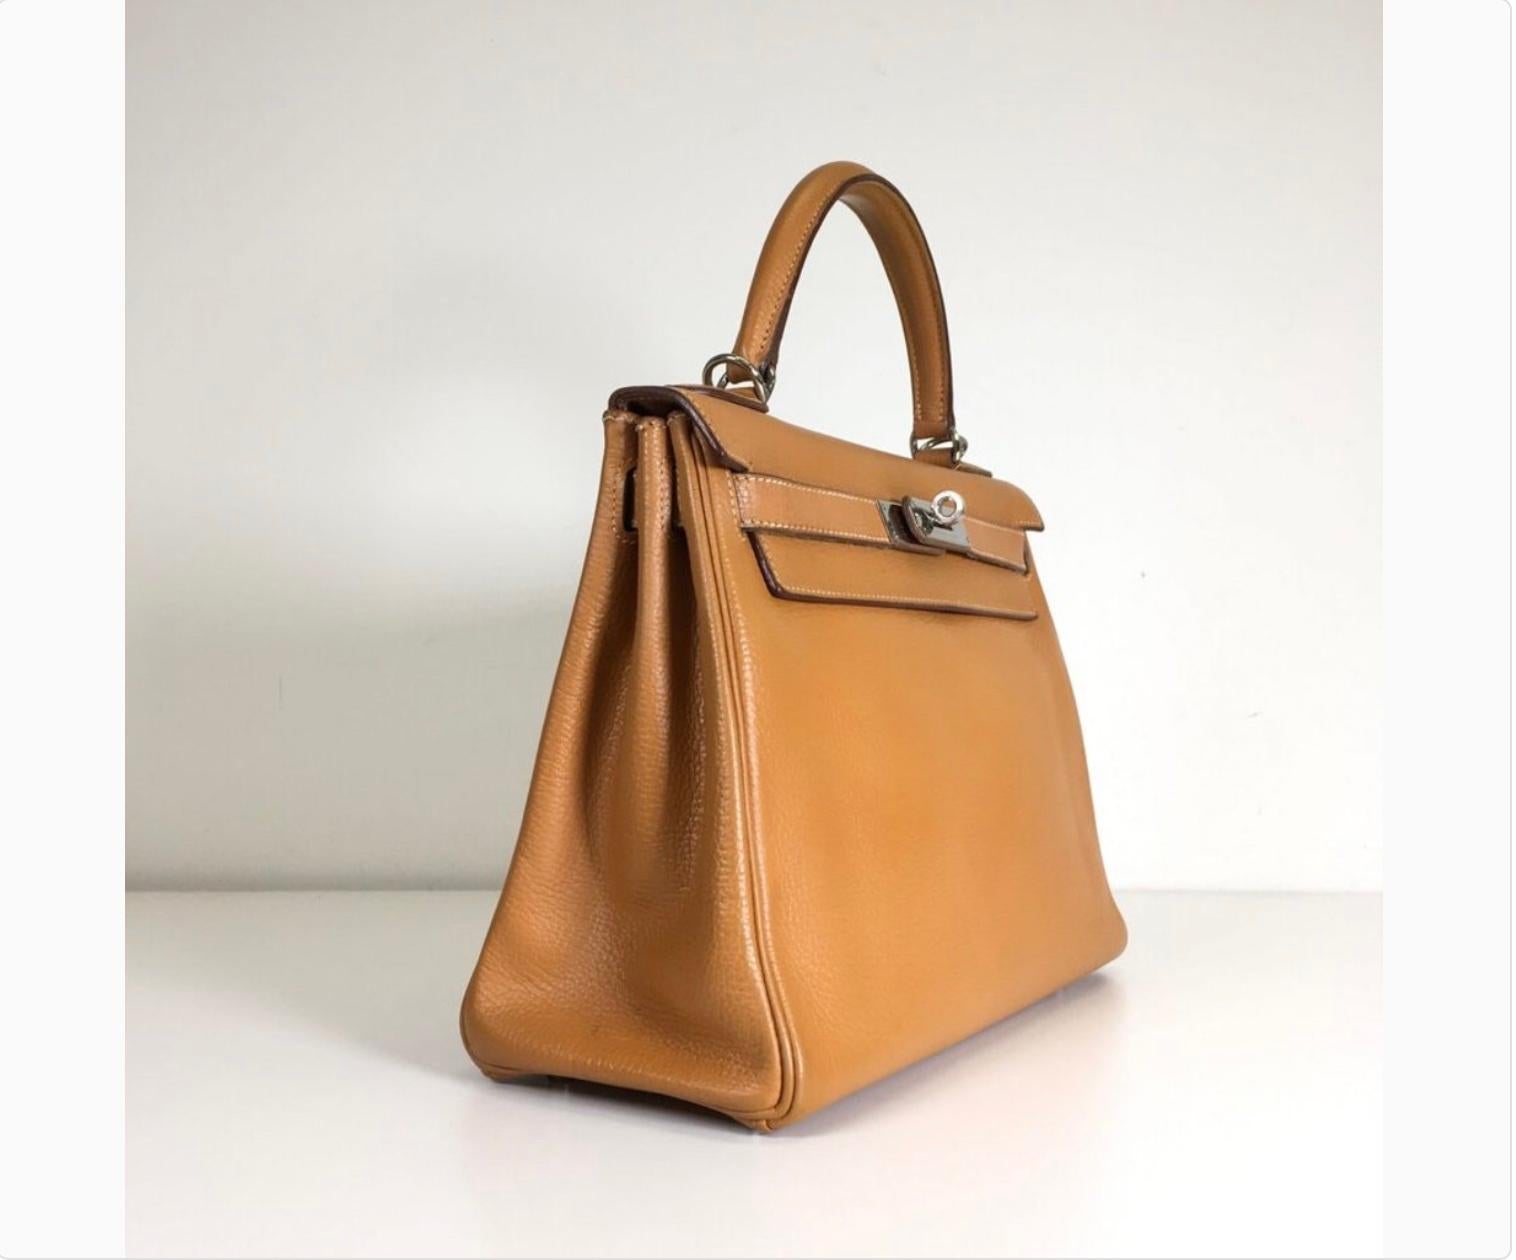 Hermes Kelly 28
Brand / Designer
Hermes
Color
Brown
Size
28
Material
Vache Liegee
Hardware
Palladium
Silver
Condition
8/10 (Average Condition)
Includes
Dustbag, Strap, Lock, Keys, Clochette
Serial / Barcode
J-2007